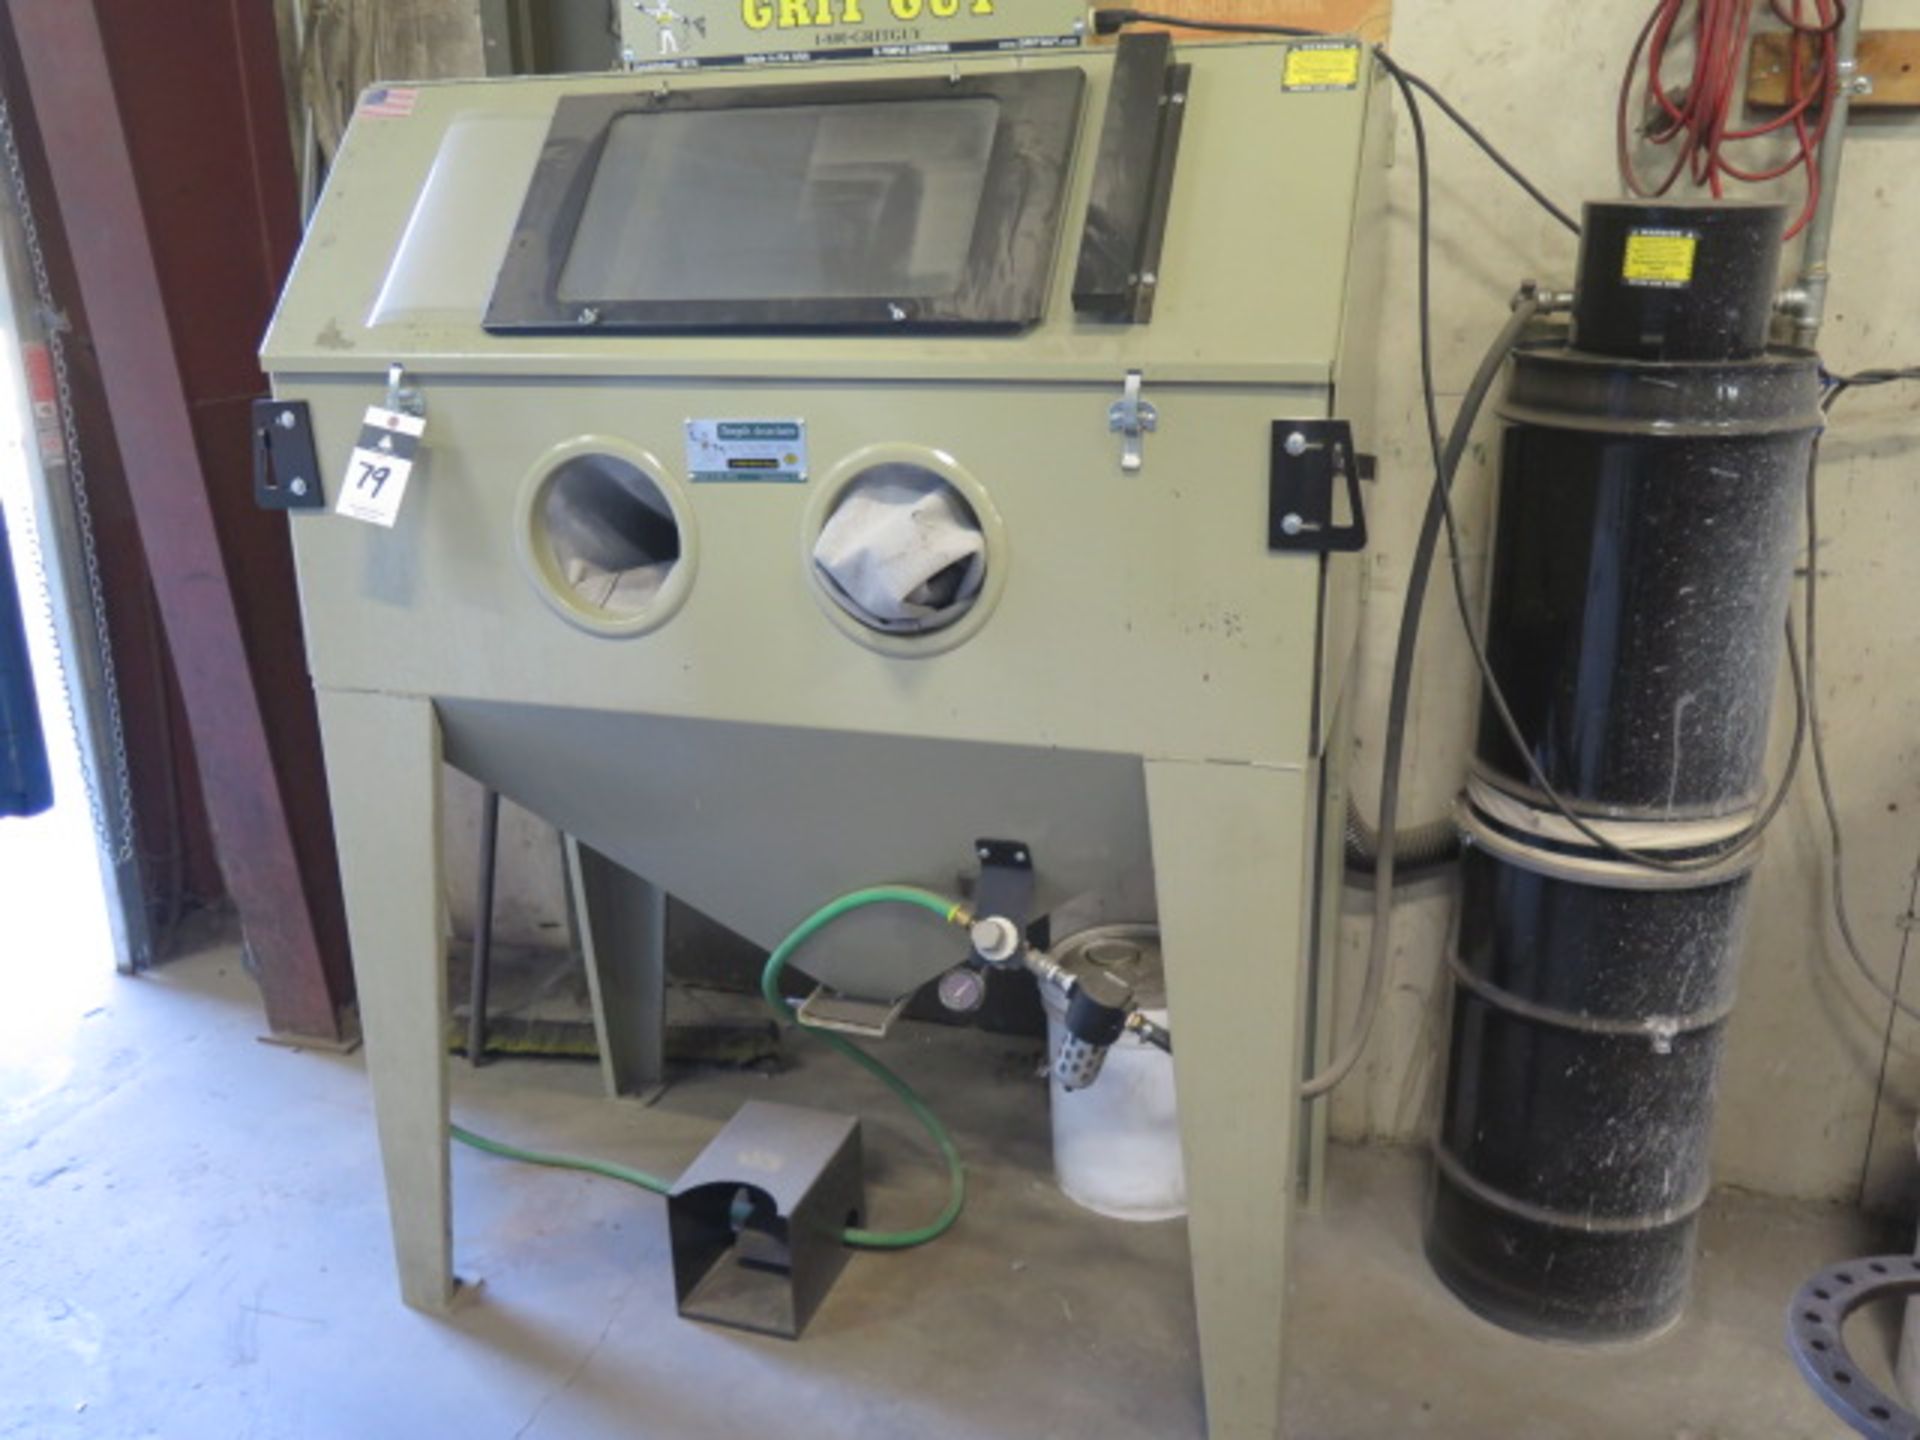 Temple Associates 24" x 48" Dry Blast Cabinet w/ Dust Collector - Image 2 of 6